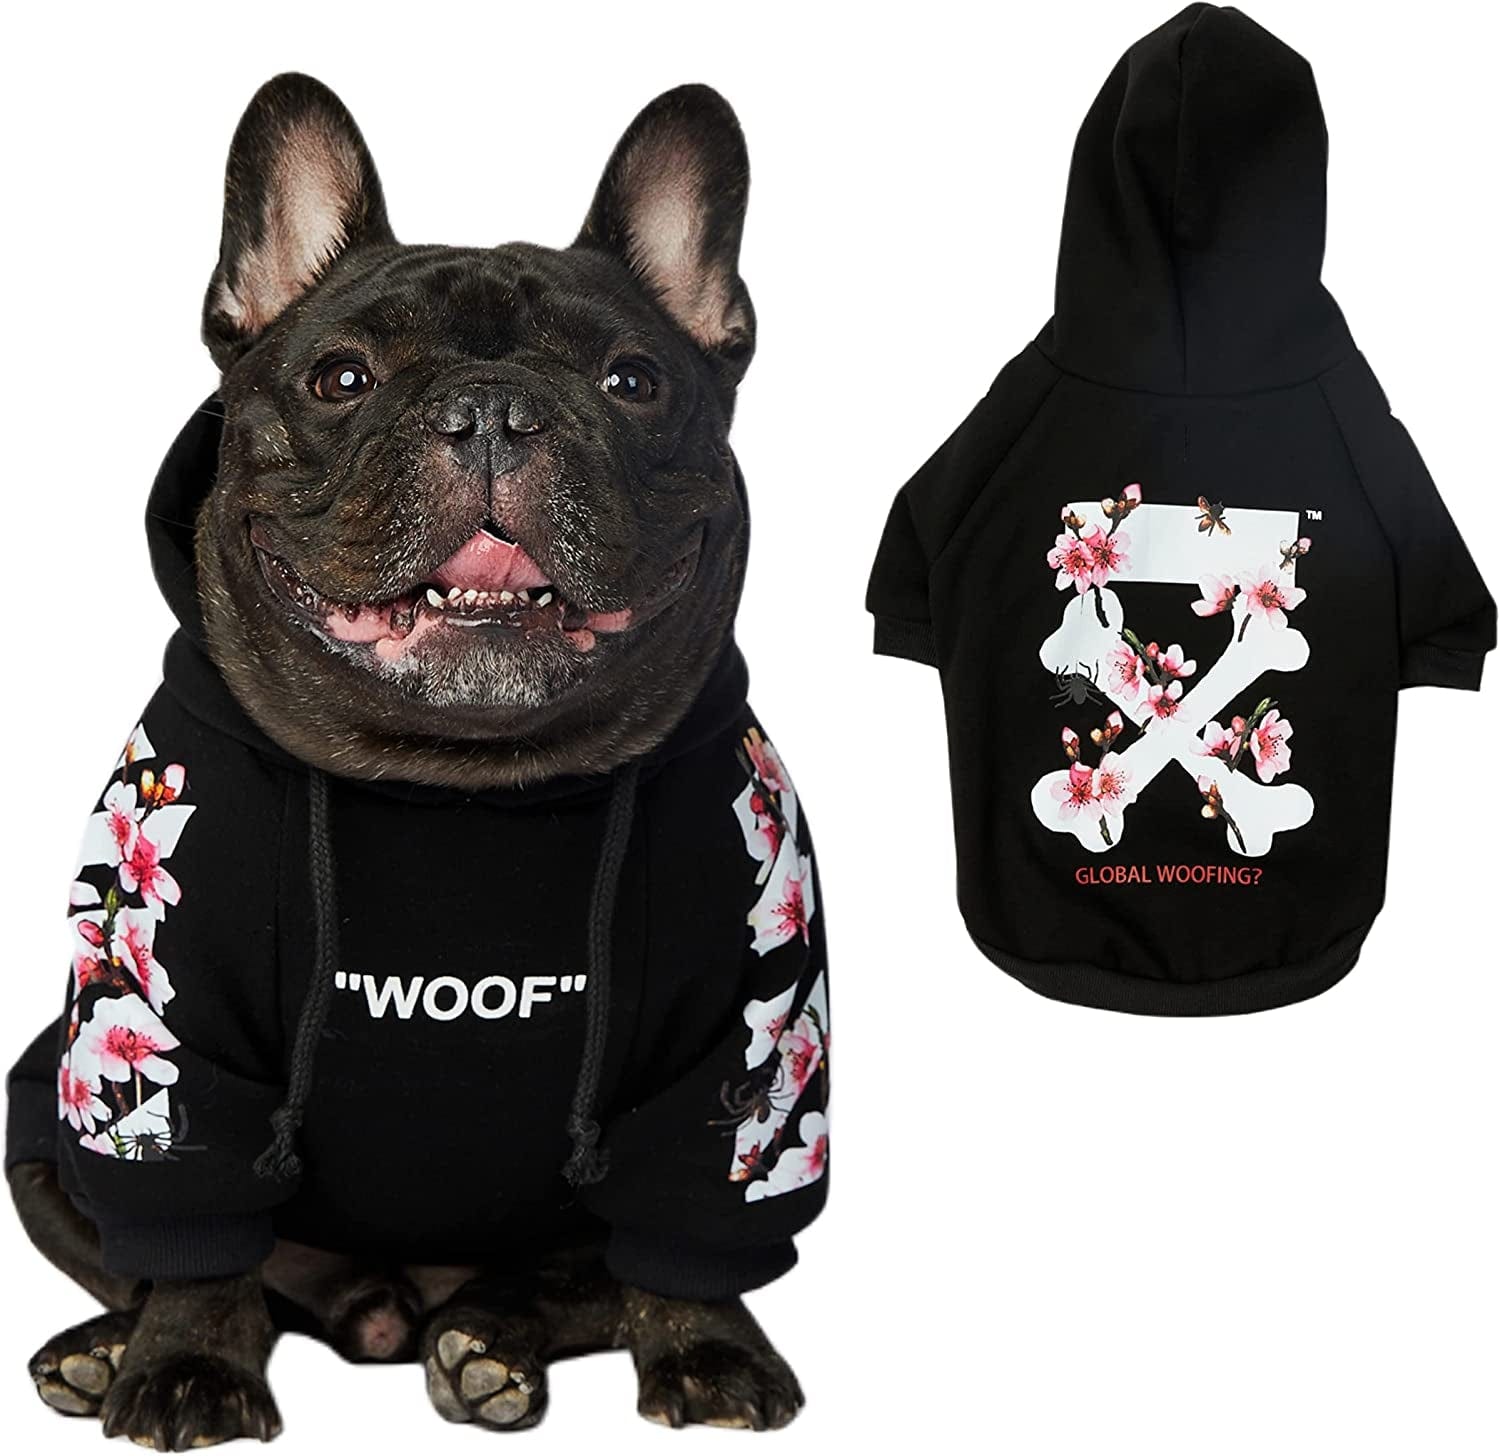 http://kol.pet/cdn/shop/products/chochocho-woof-dog-hoodie-designer-dog-hoodies-for-small-medium-large-breeds-art-collection-dog-sweatshirts-street-drawstring-hoodies-outfit-clothes-for-puppy-puppies-4xl-sakura-black_ac7c86d5-b8a6-45c7-92df-377527d4179e.jpg?v=1678702324